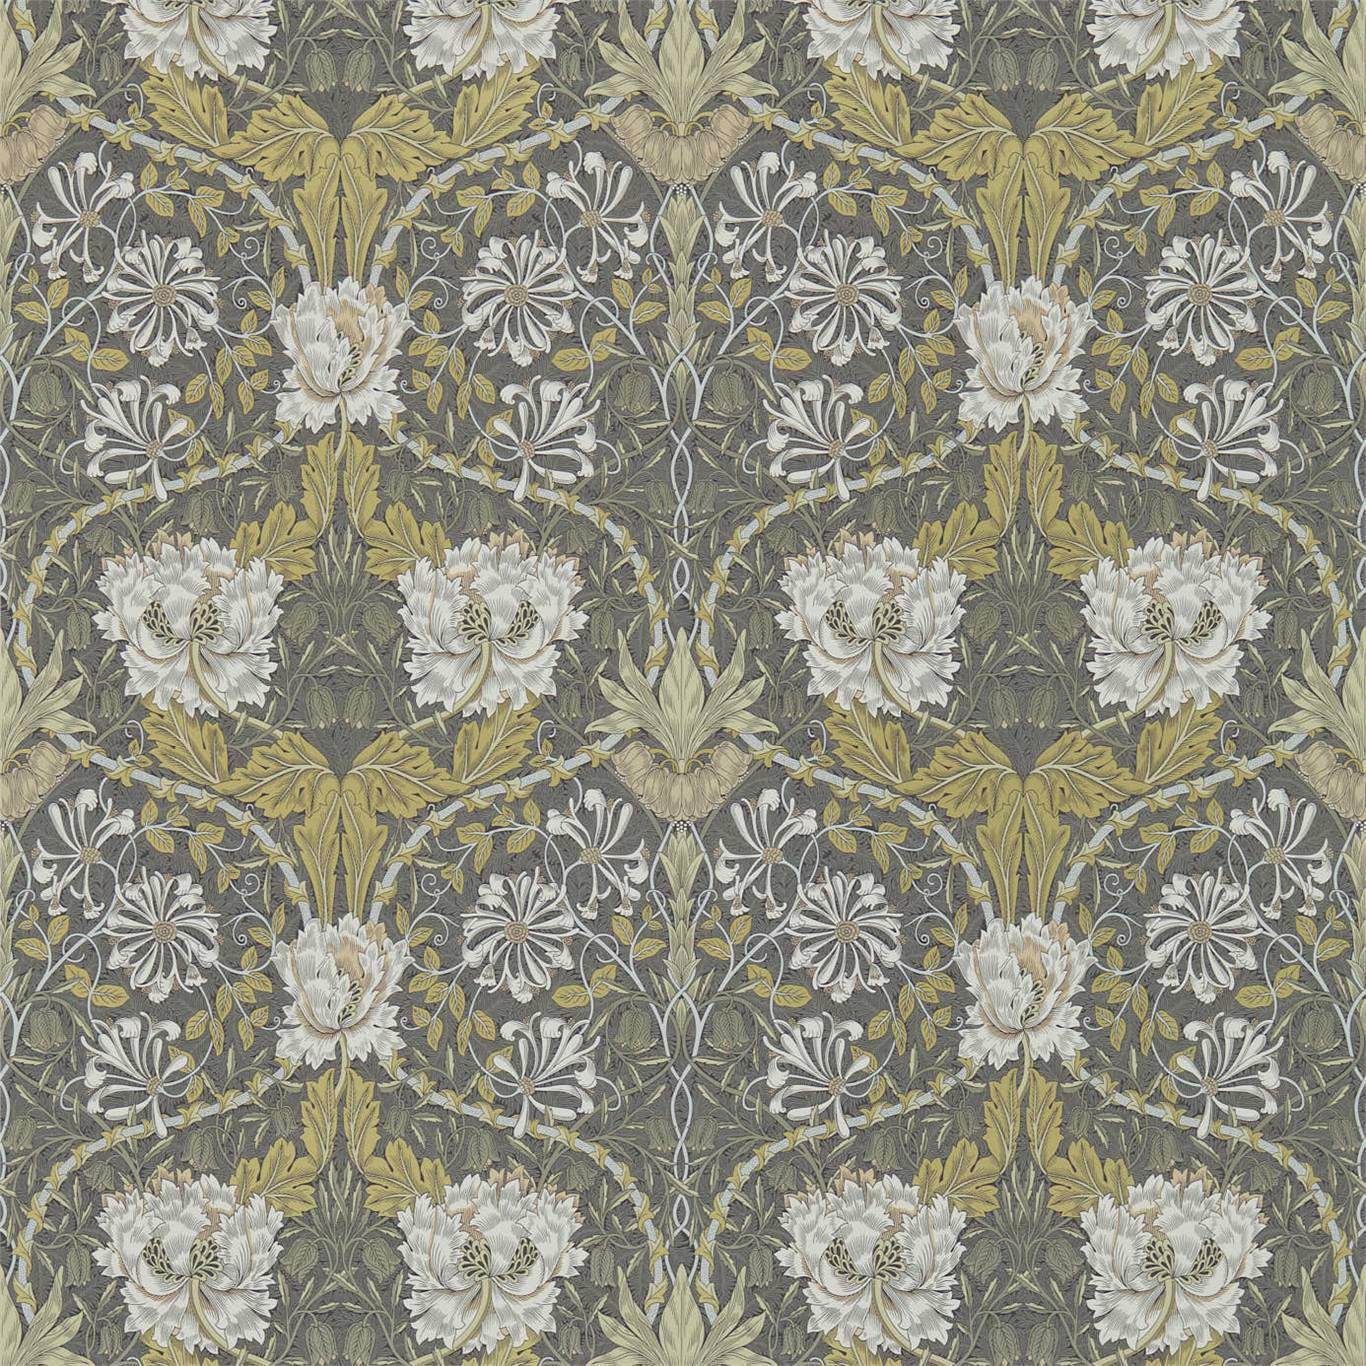 Honeysuckle & Tulip Charcoal/Gold Wallpaper DCMW216827 by Morris & Co